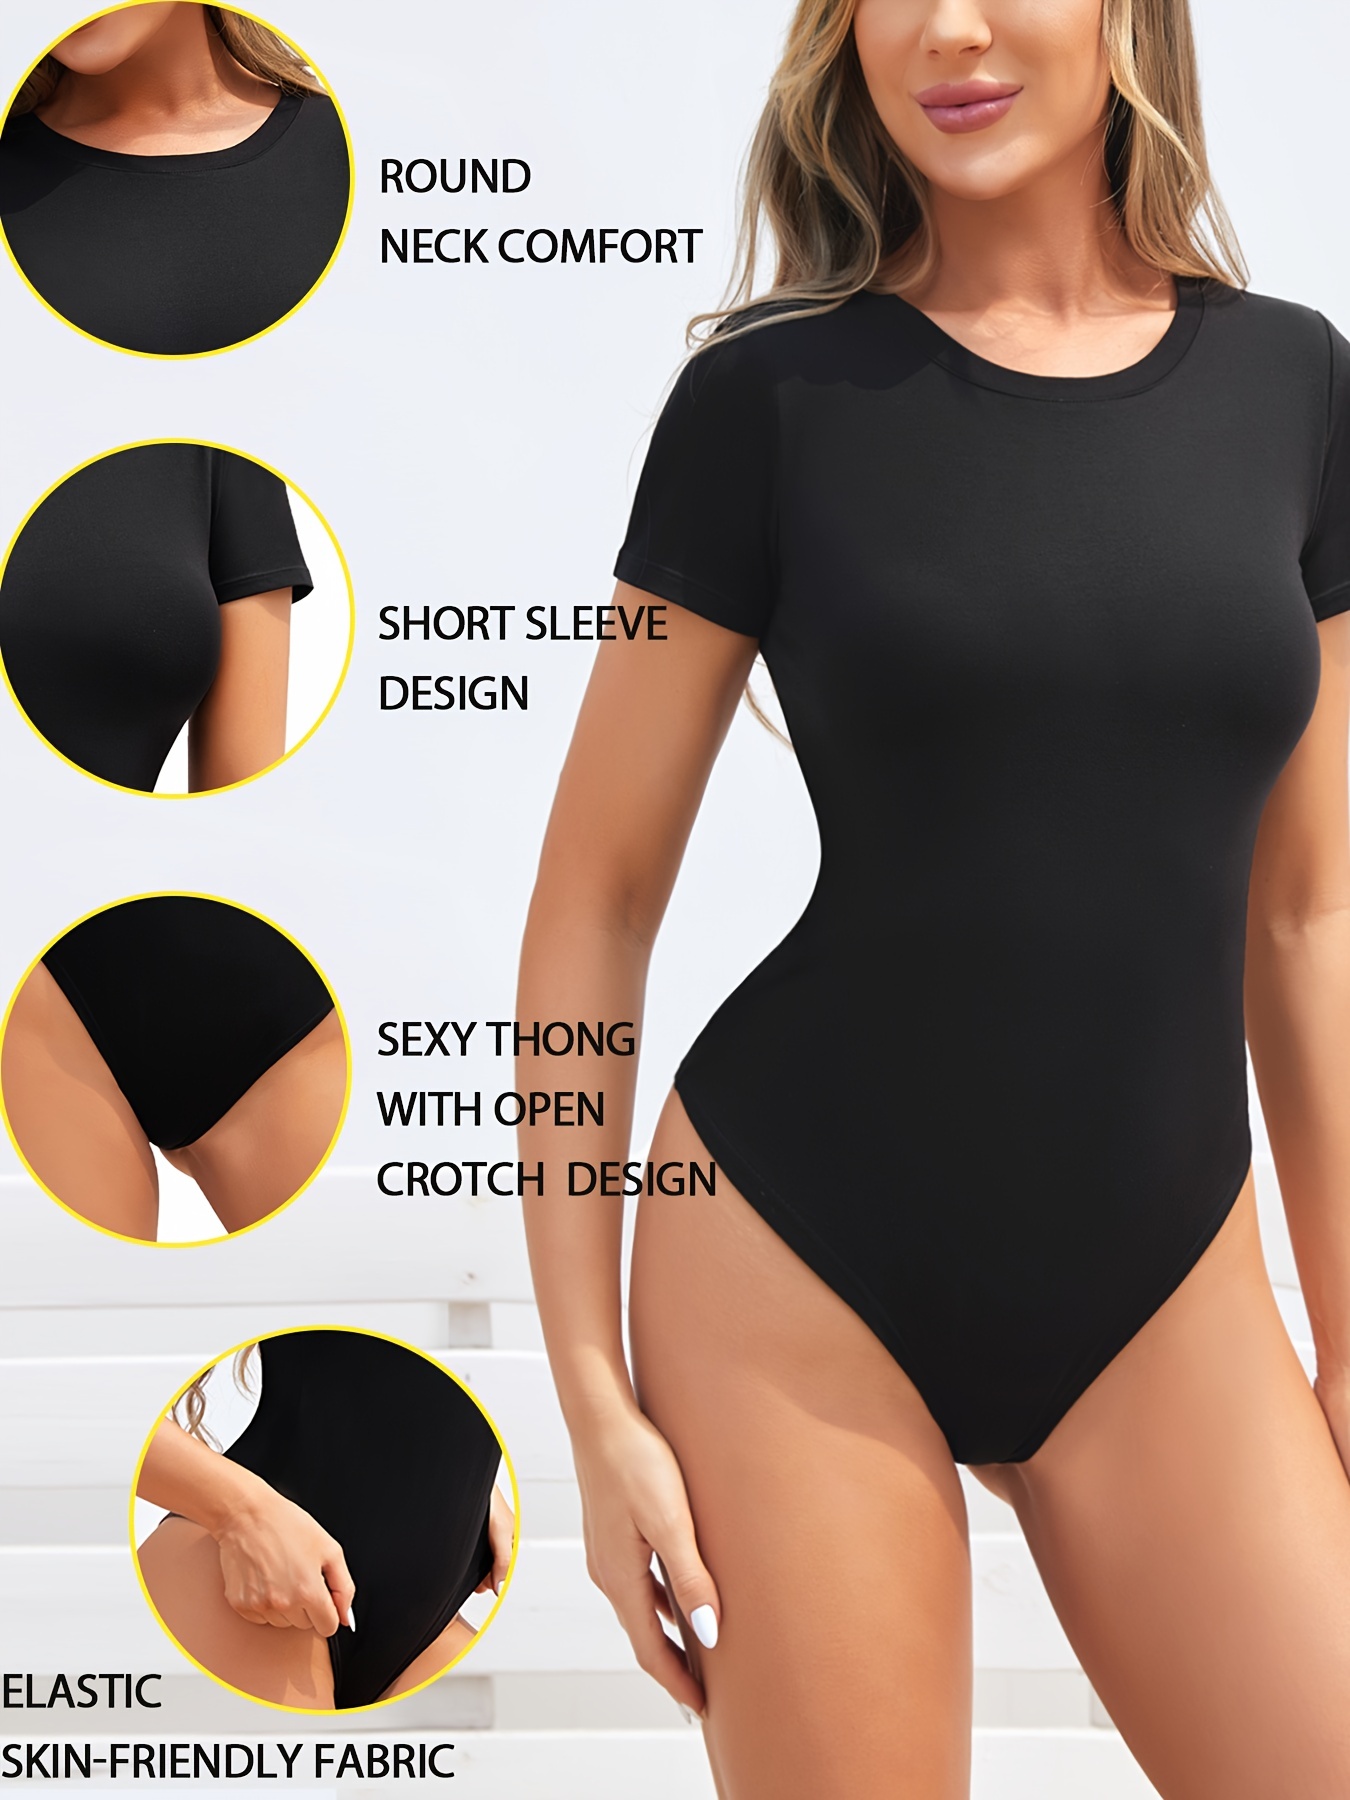 Shapermint Long & Short-Sleeve Shaping Bodysuits Review & Try On